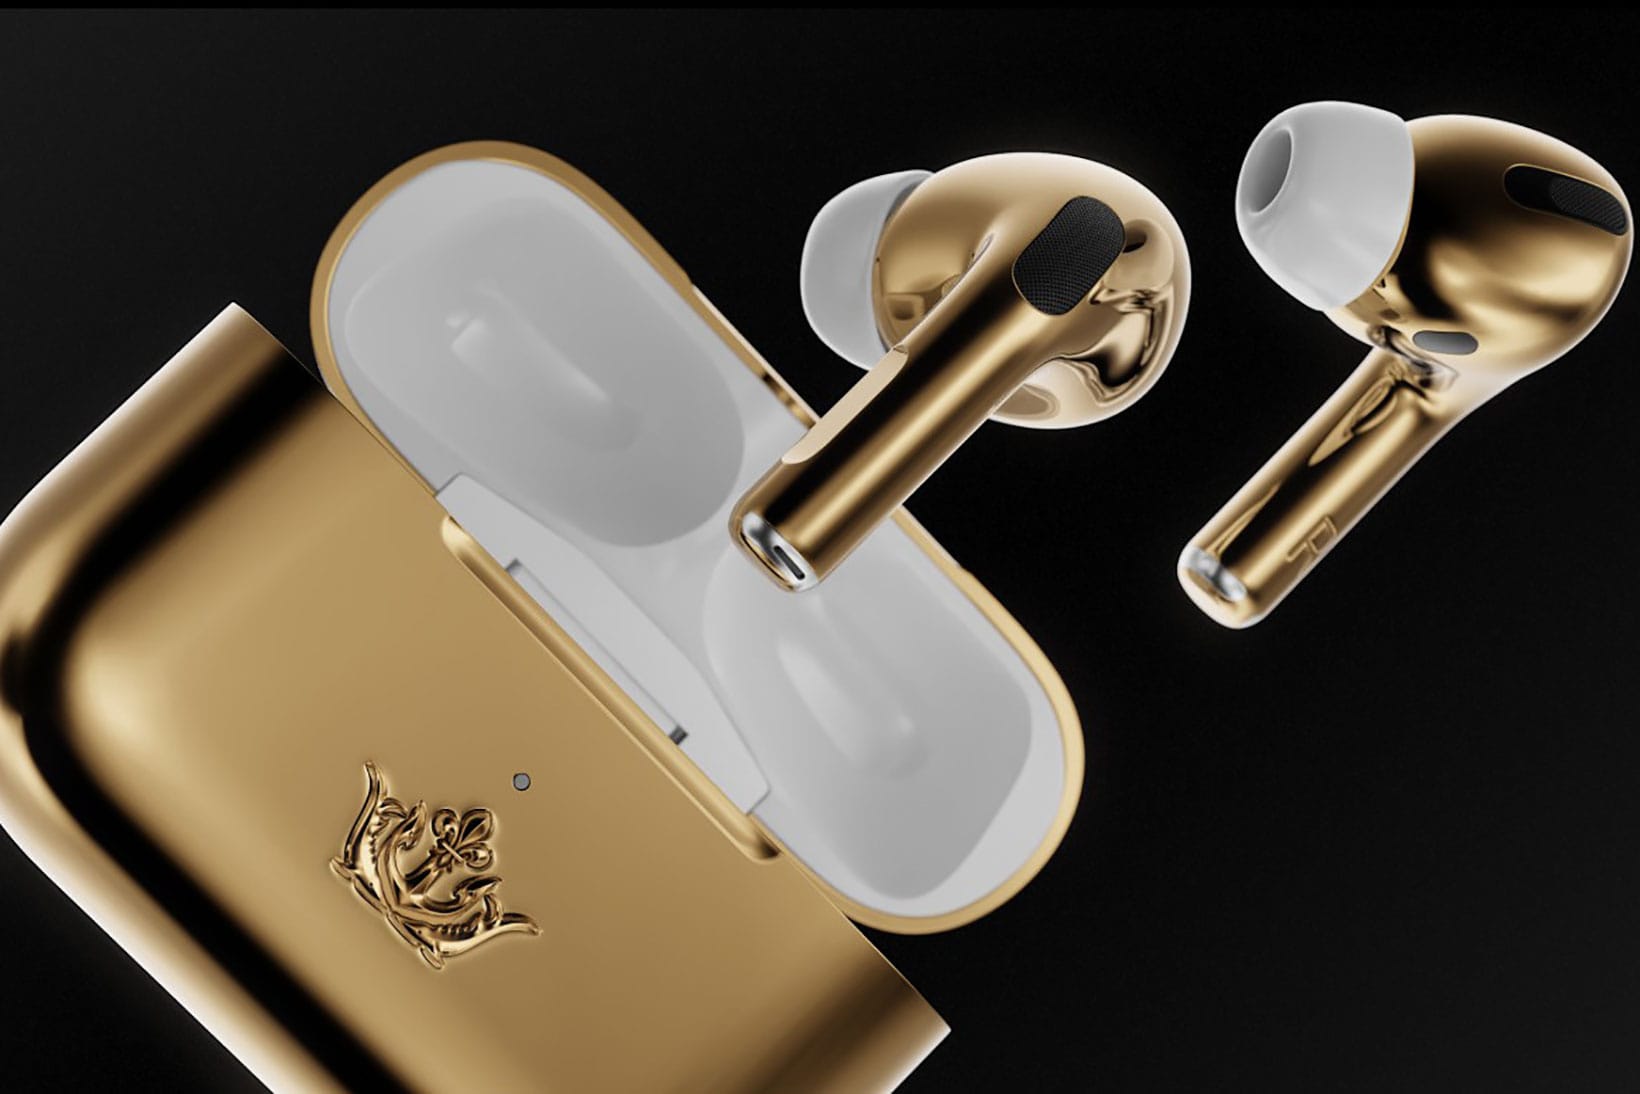 Airpods 13. Caviar AIRPODS Gold Edition. Apple AIRPODS Pro Gold. Наушники Apple AIRPODS Pro 2 (золотой). Caviar AIRPODS Pro Gold Edition.